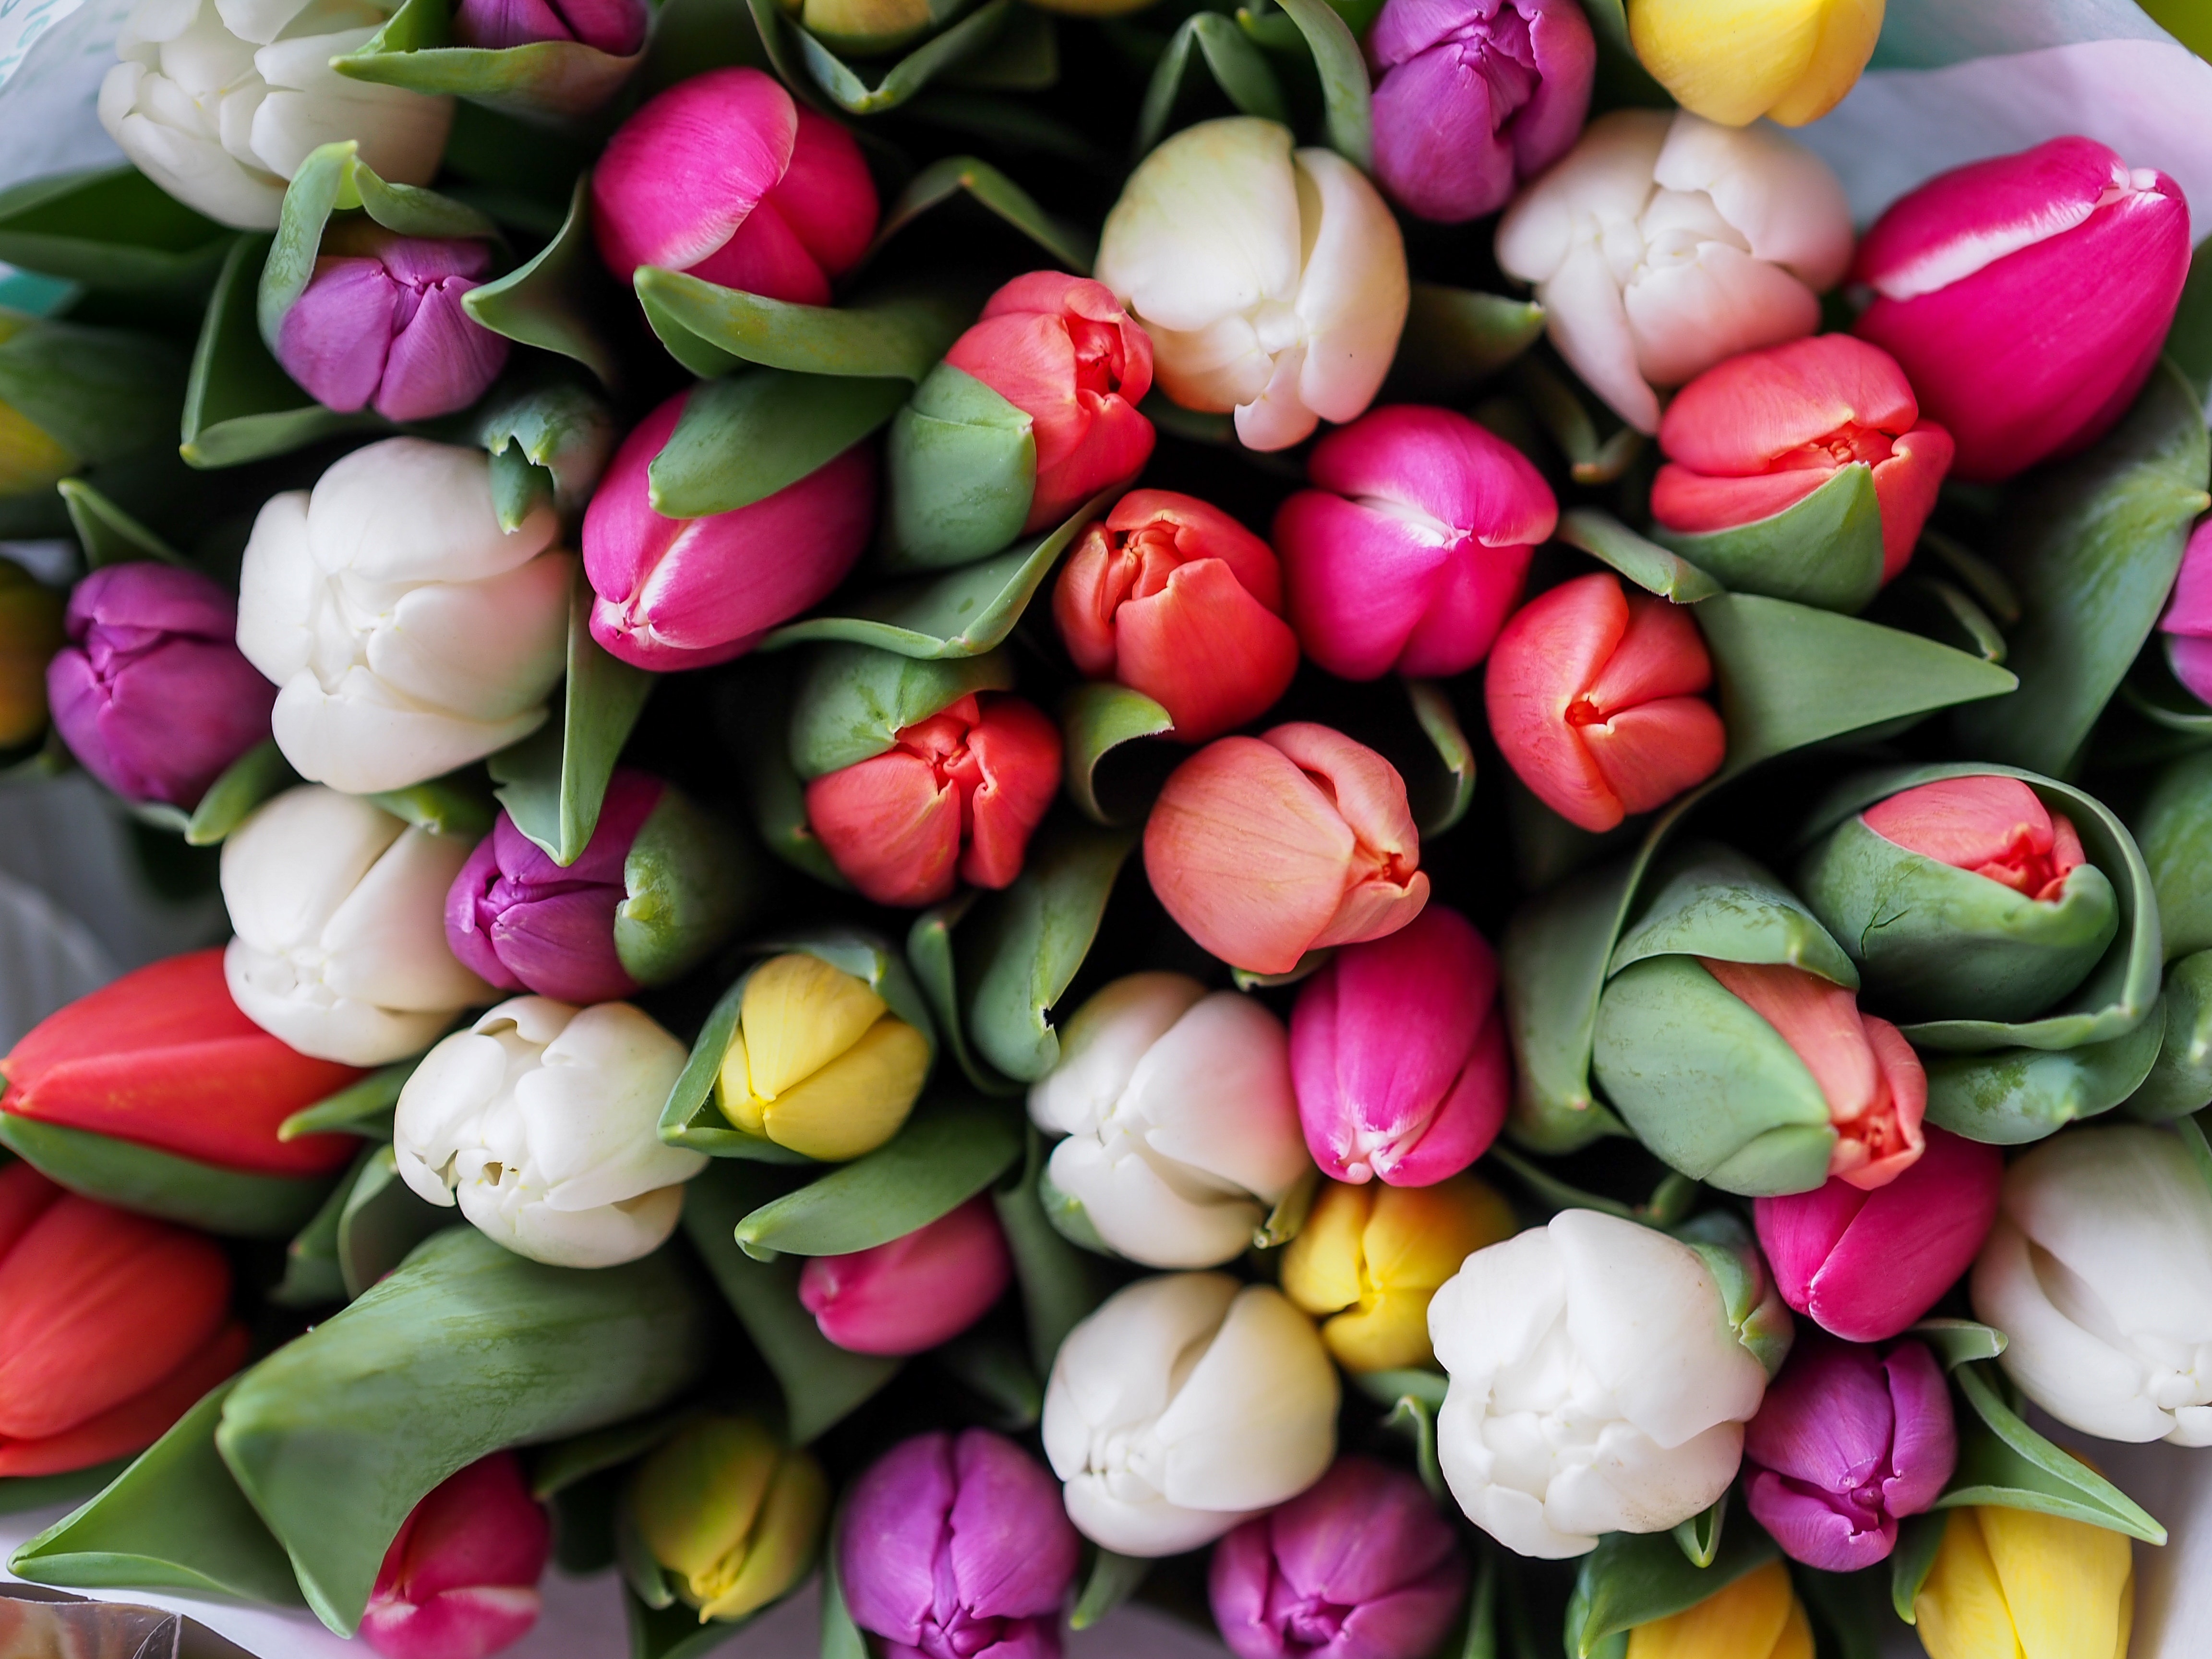 4608x3456 #flower, #love, #pastel, #blooom, #photosynthesis, #Public domain image, #tulip, #flora, #spring, #flower wallpaper, #color, #flower background, #valentine, #bright, #floral background, #bouquet, # wallpaper, #rose, #blossom, #almost